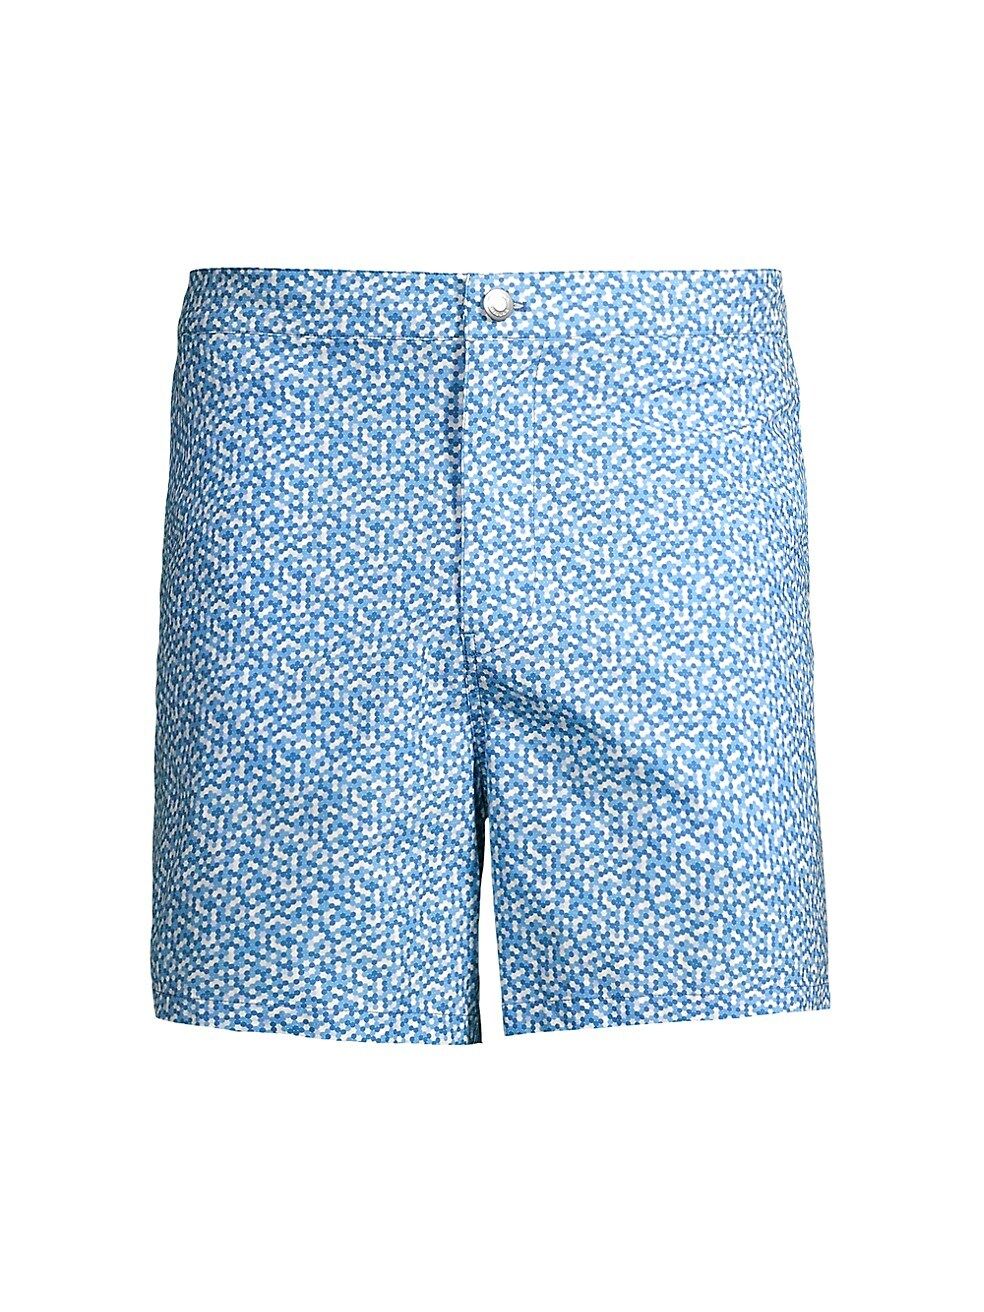 Crown Crafted Palma Dot Swim Shorts | Saks Fifth Avenue